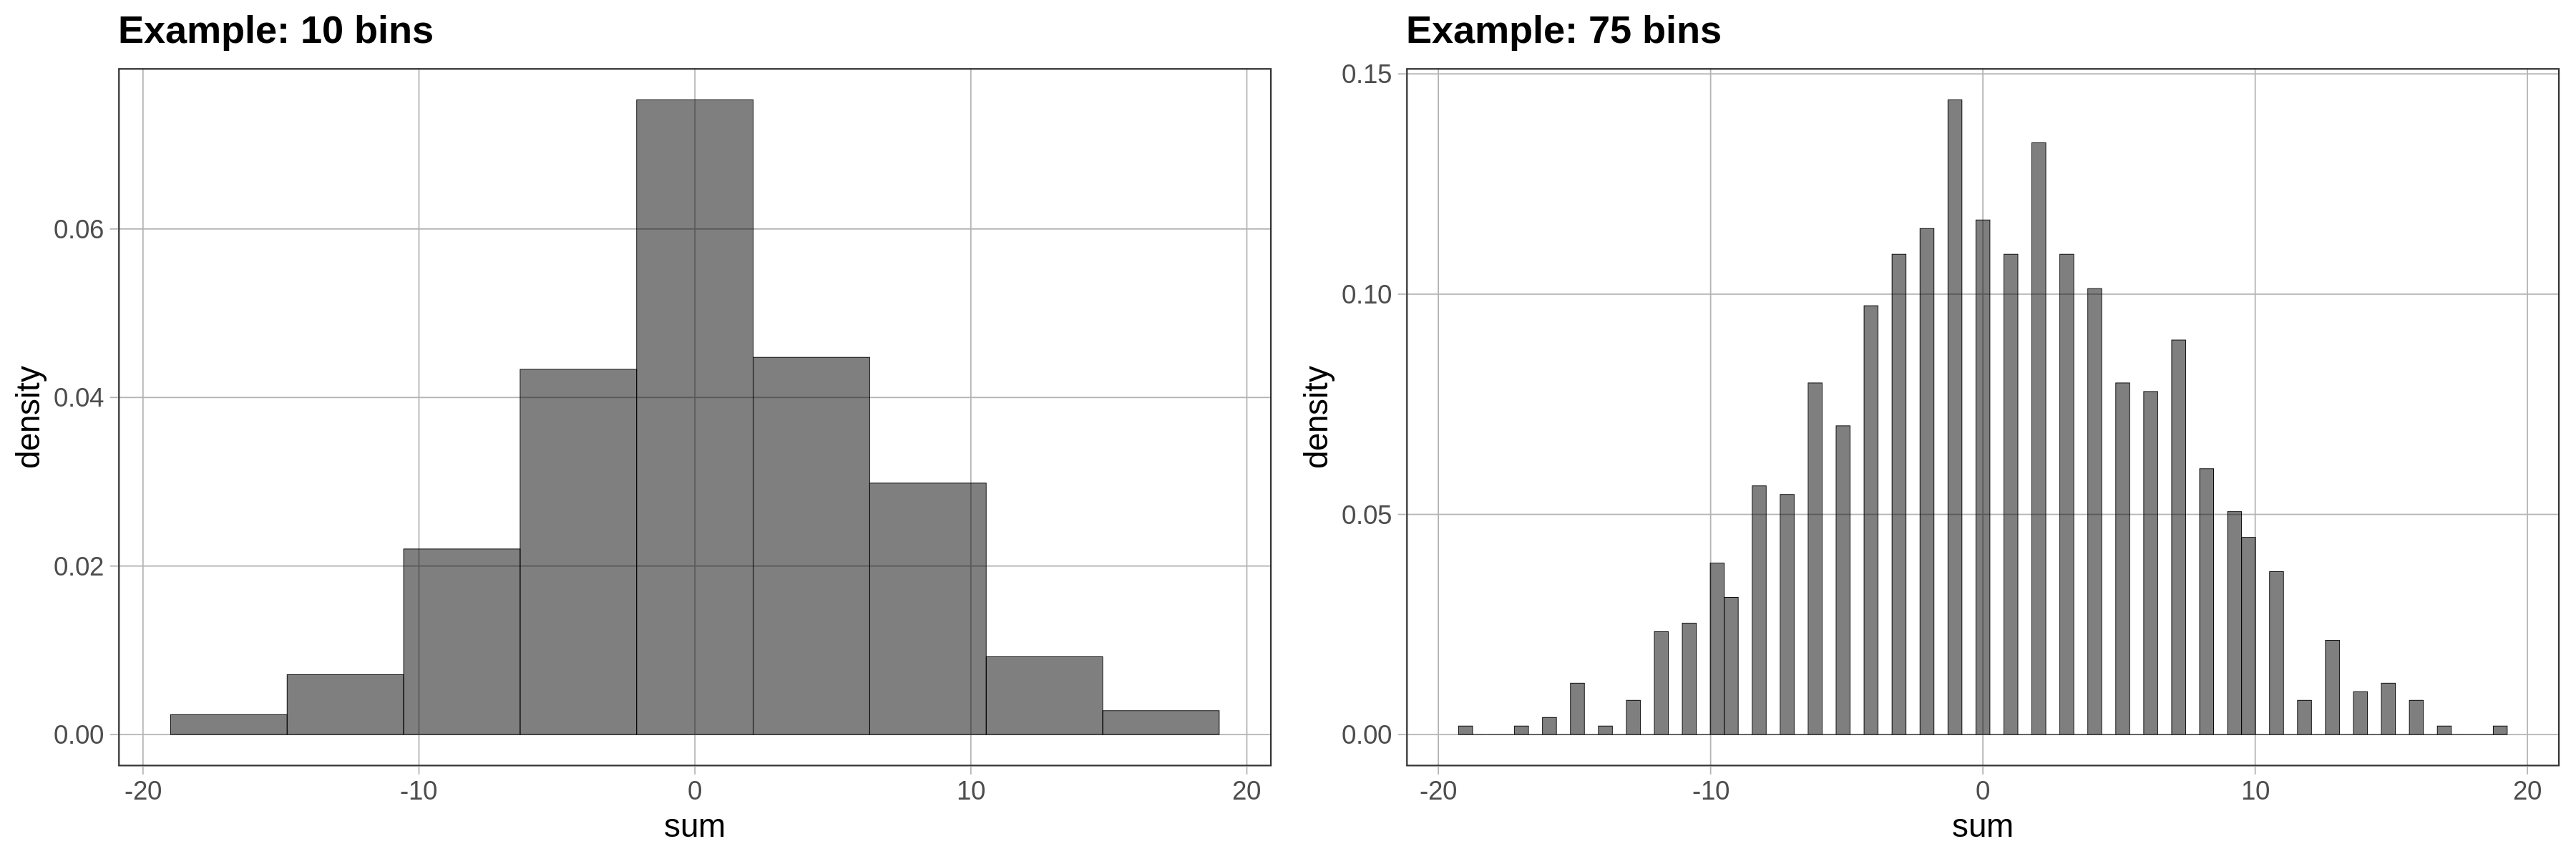 A density histogram of the distribution of total in somedata with 10 bins on the left. There’s no gap between the bins. Another density histogram of the distribution of total in somedata with 75 bins on the right. There are gaps between the bins.